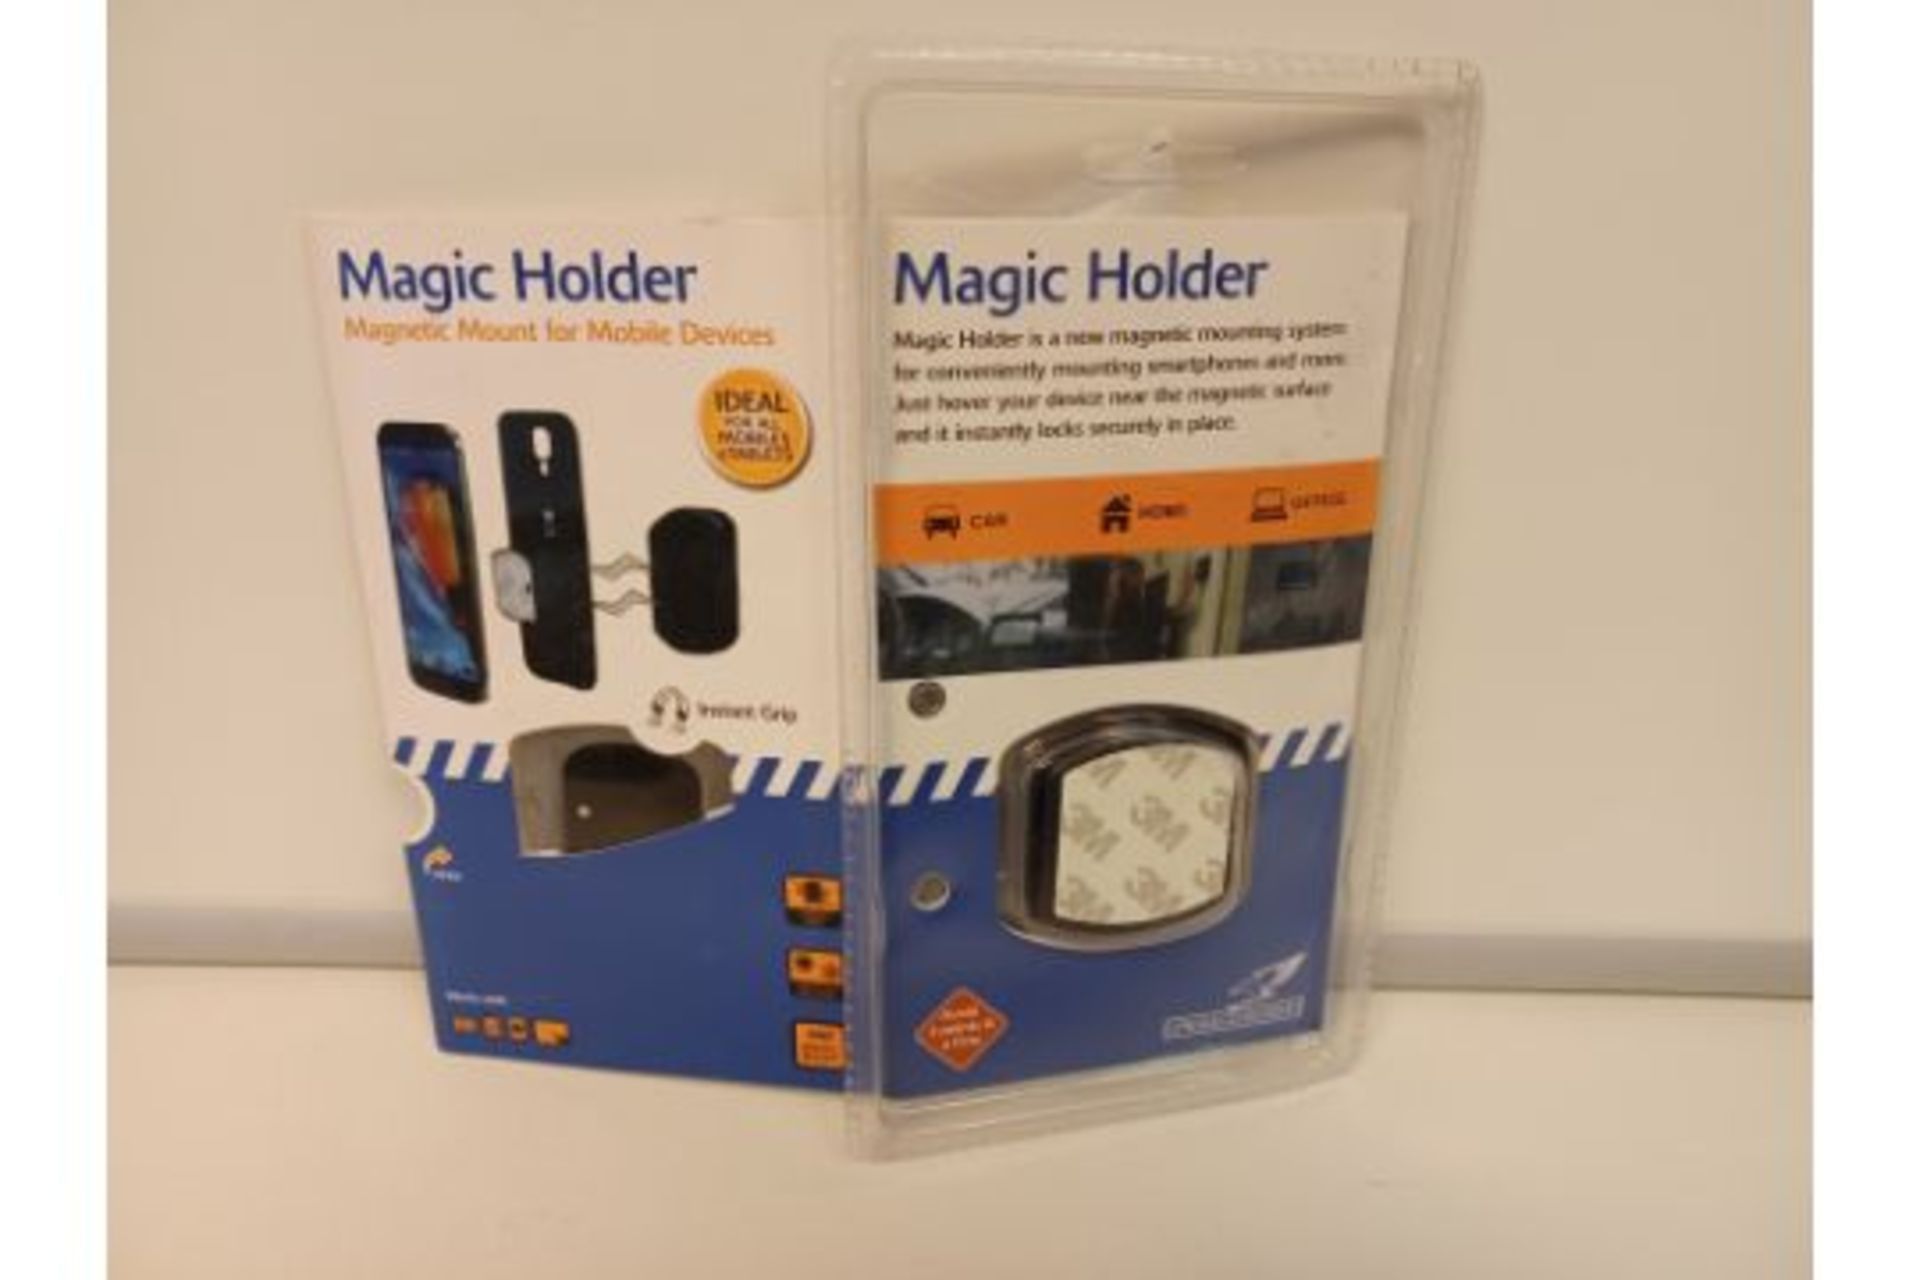 60 X NEW PACKAGED FALCON MAGIC HOLDERS - MAGNETIC MOUNT FOR MOBILE DEVICES. IDEAL FOR ALL